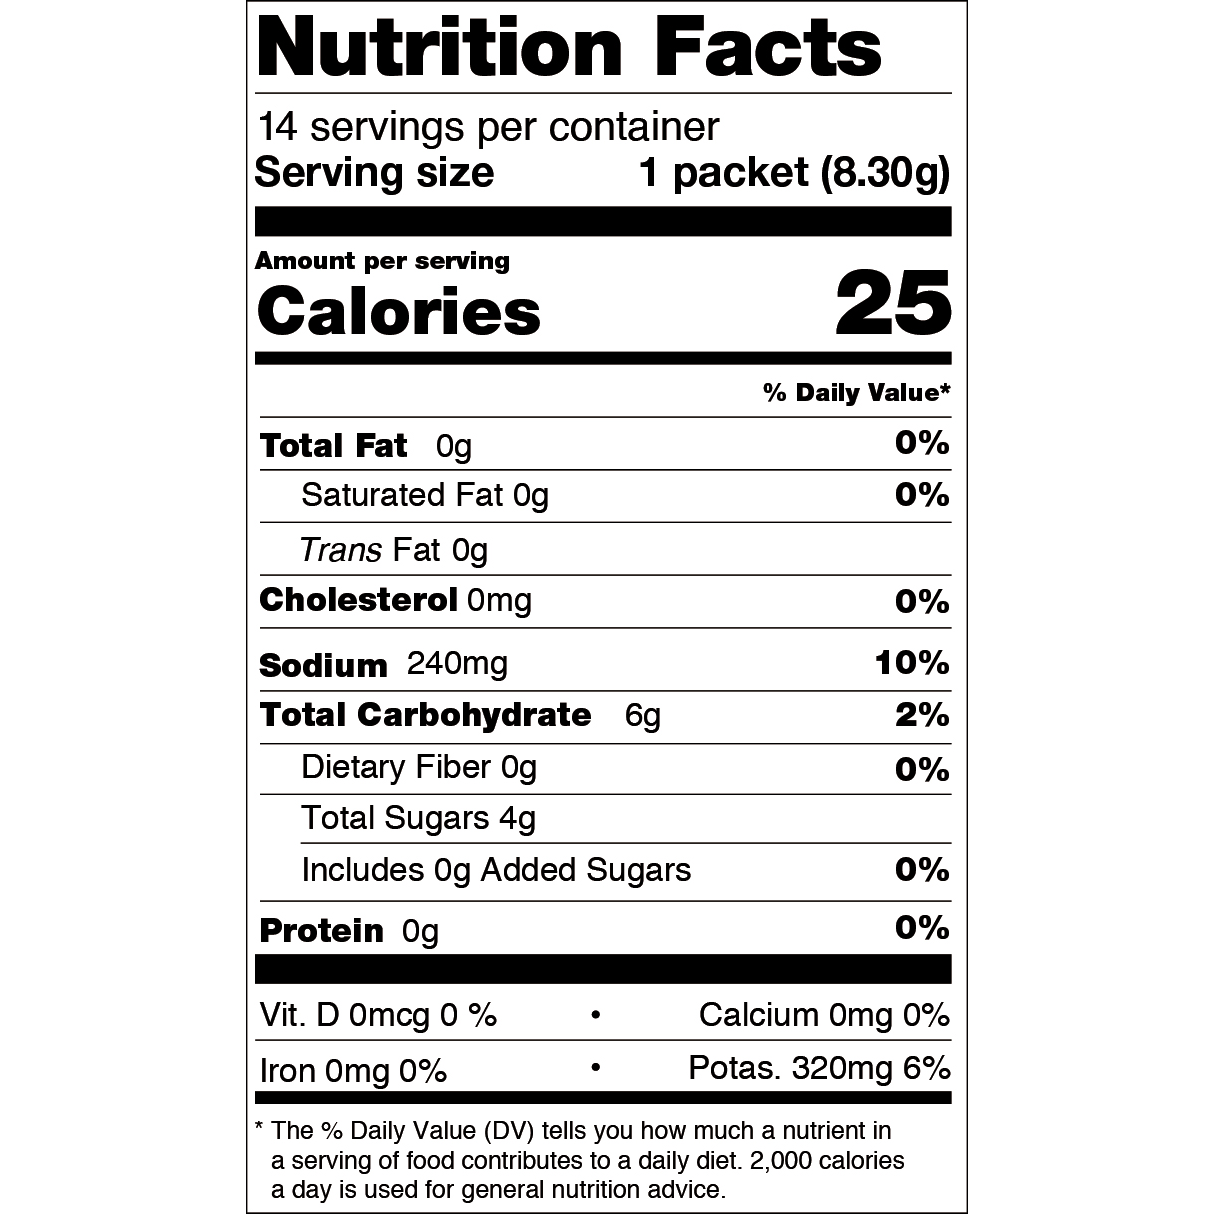 Nutrition facts for 'cure' lime electrolyte mix.